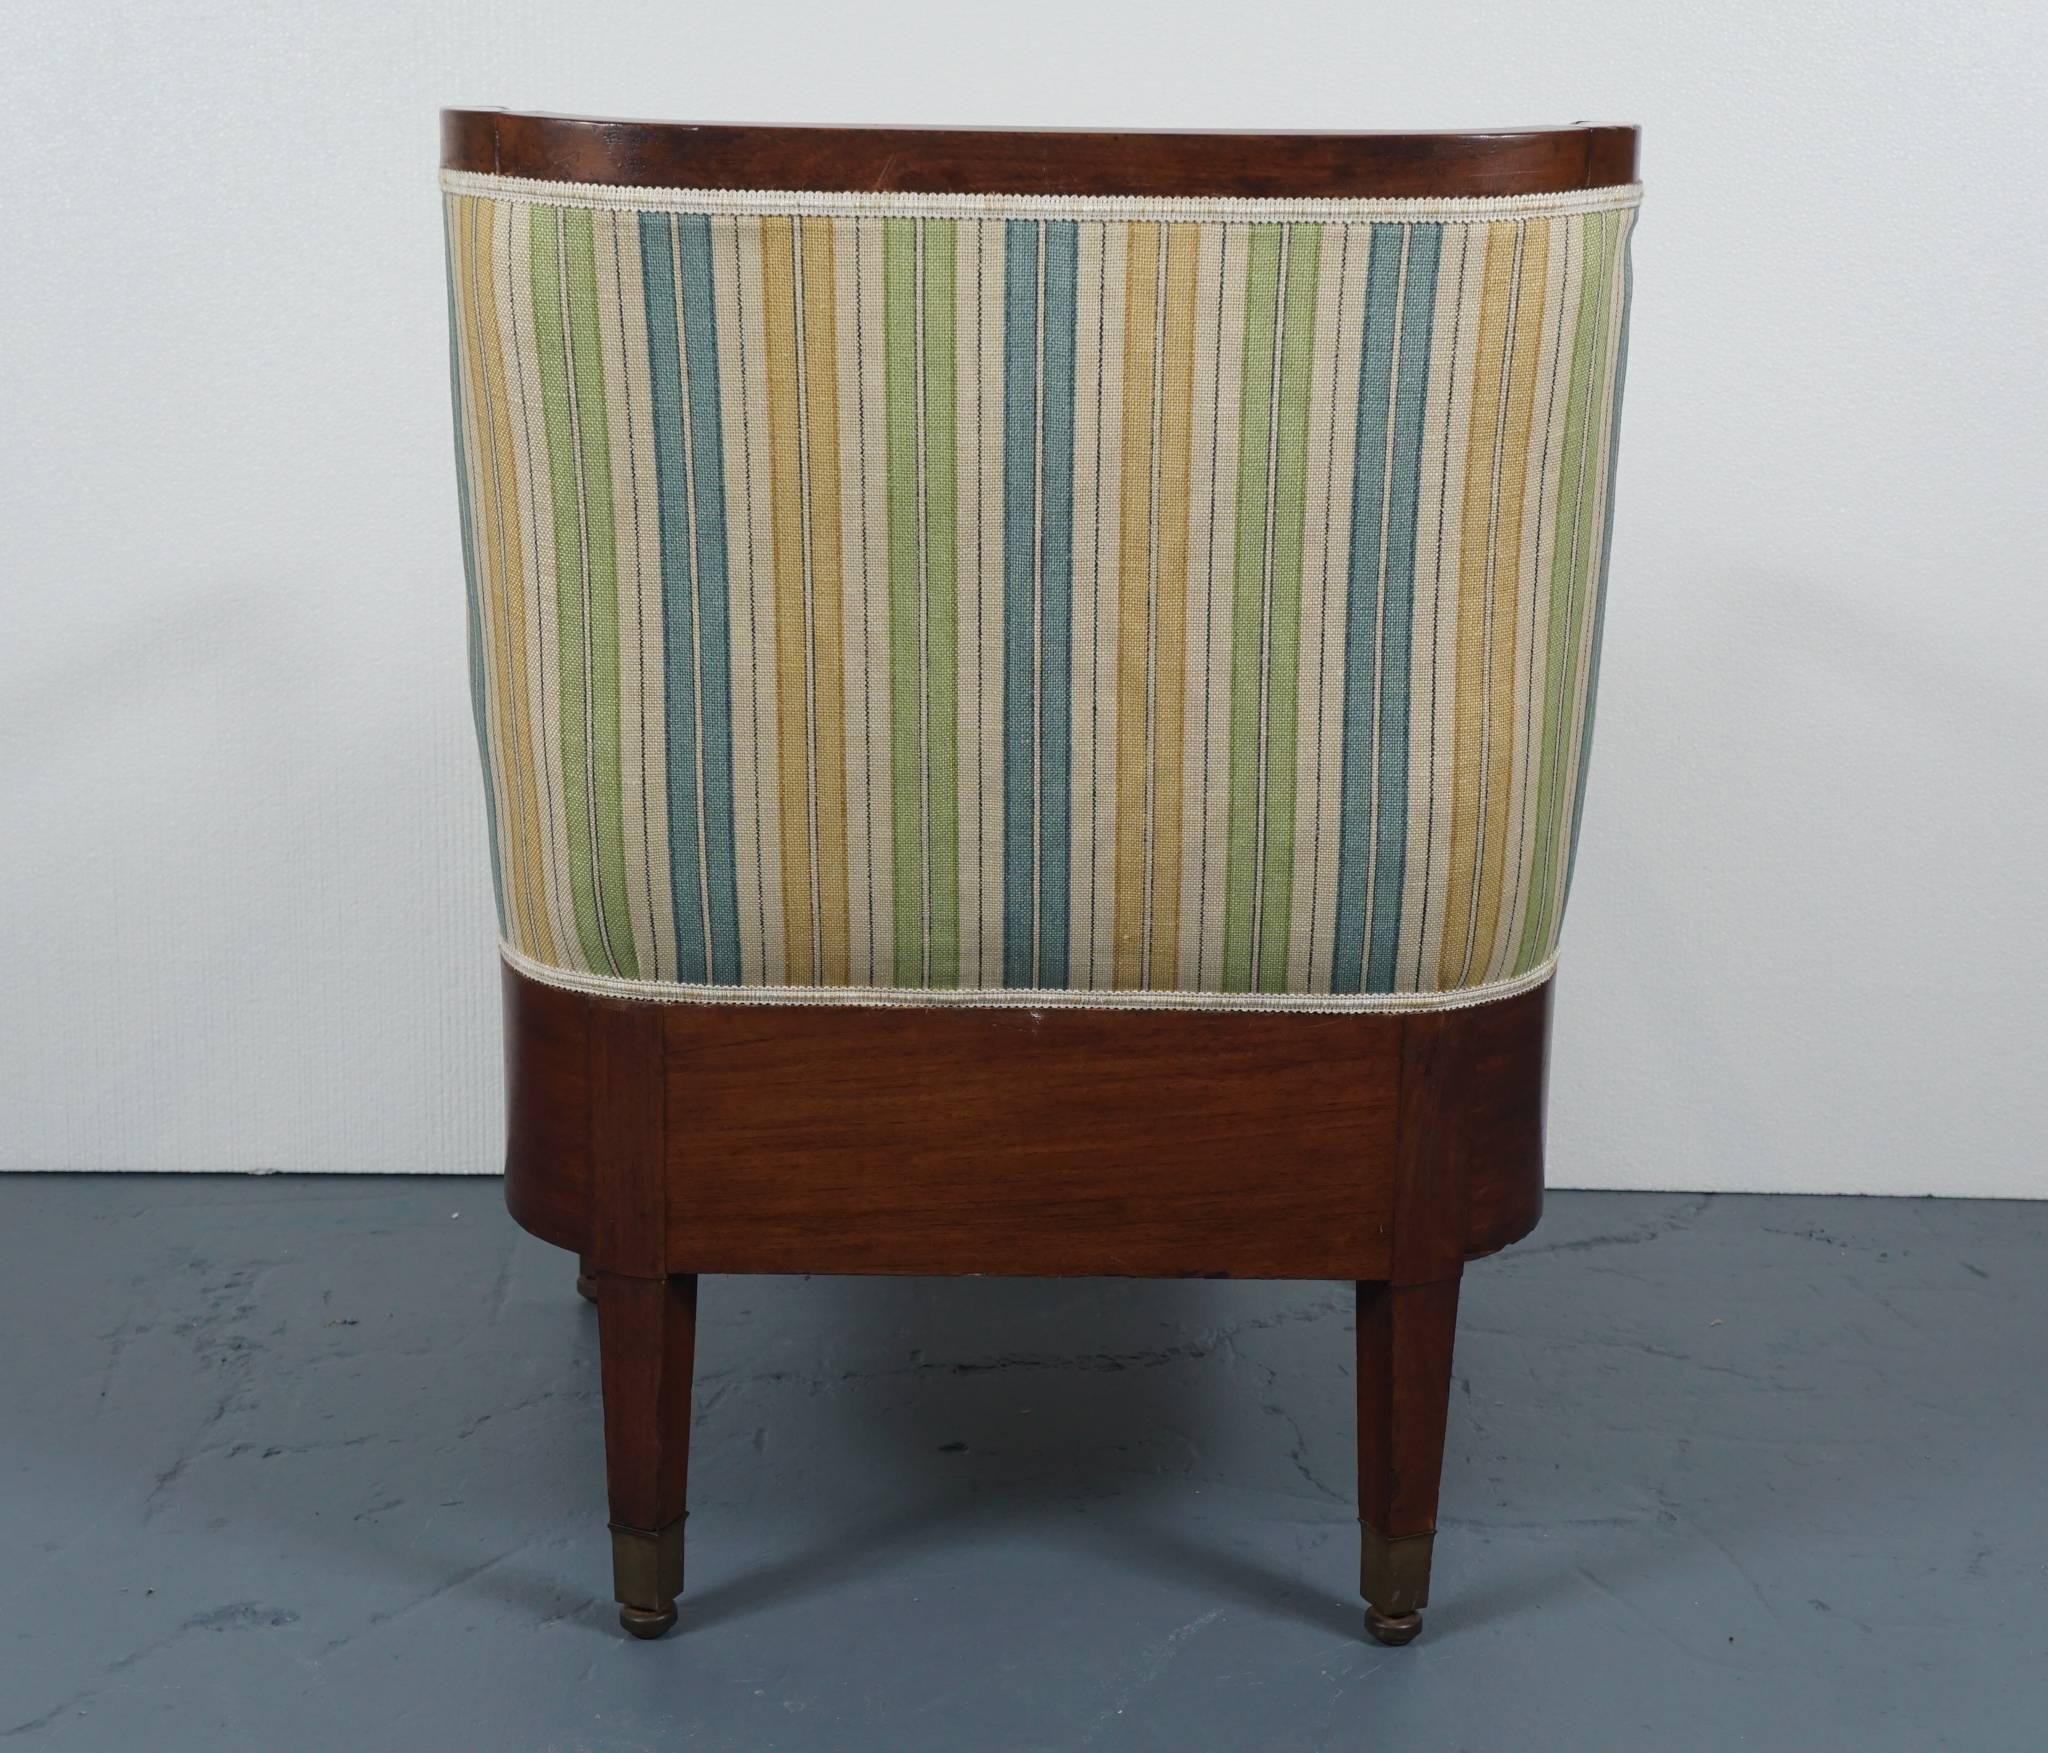 Late 19th Century Empire Mahogany Chair in Striped Fabric For Sale